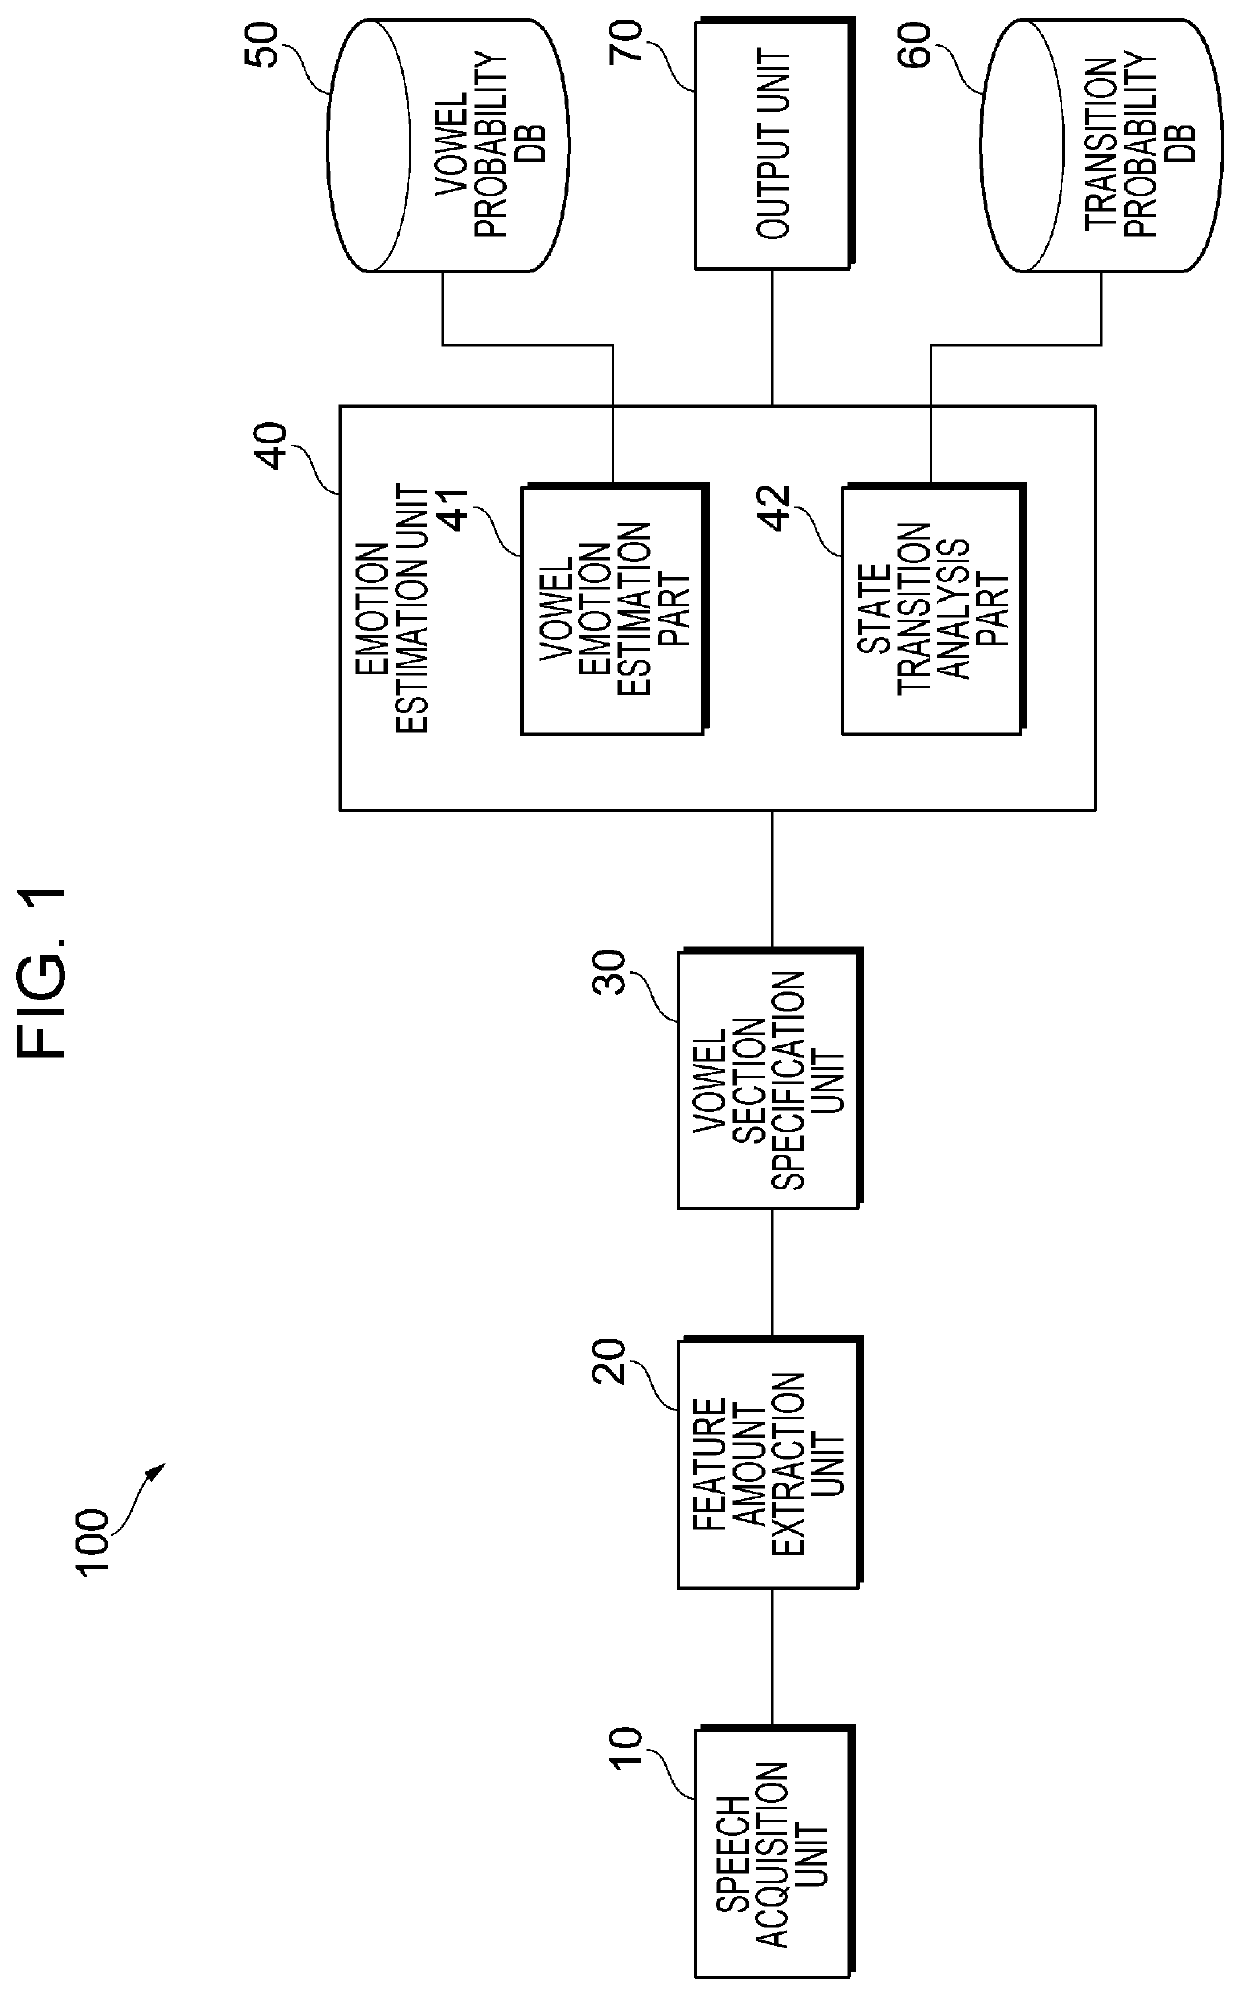 Emotion estimation system and non-transitory computer readable medium